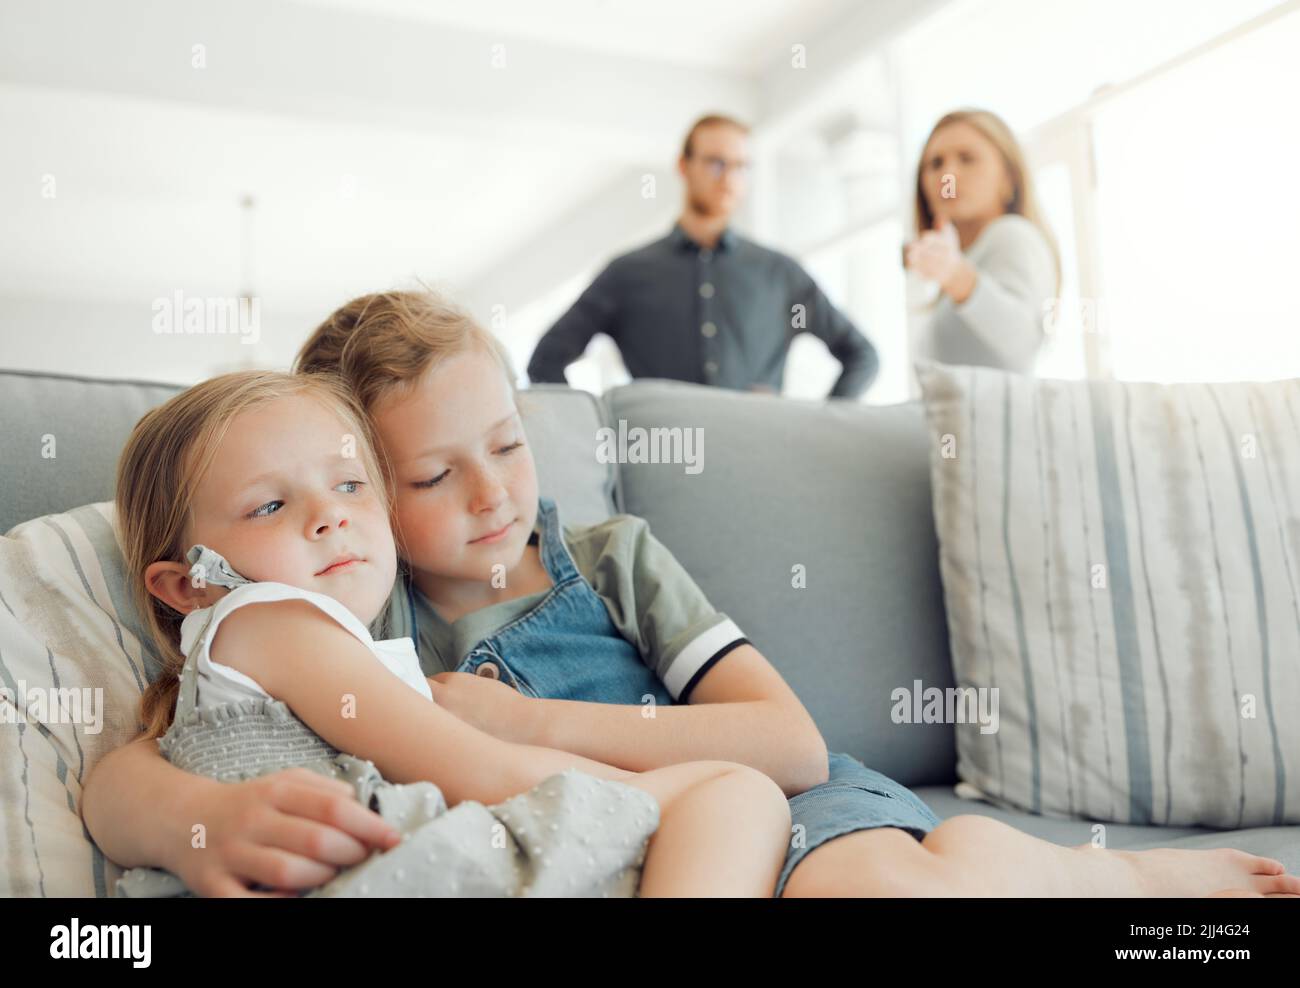 Look at what youre doing to them. two little girls holding each other while their parents argue in the background at home. Stock Photo